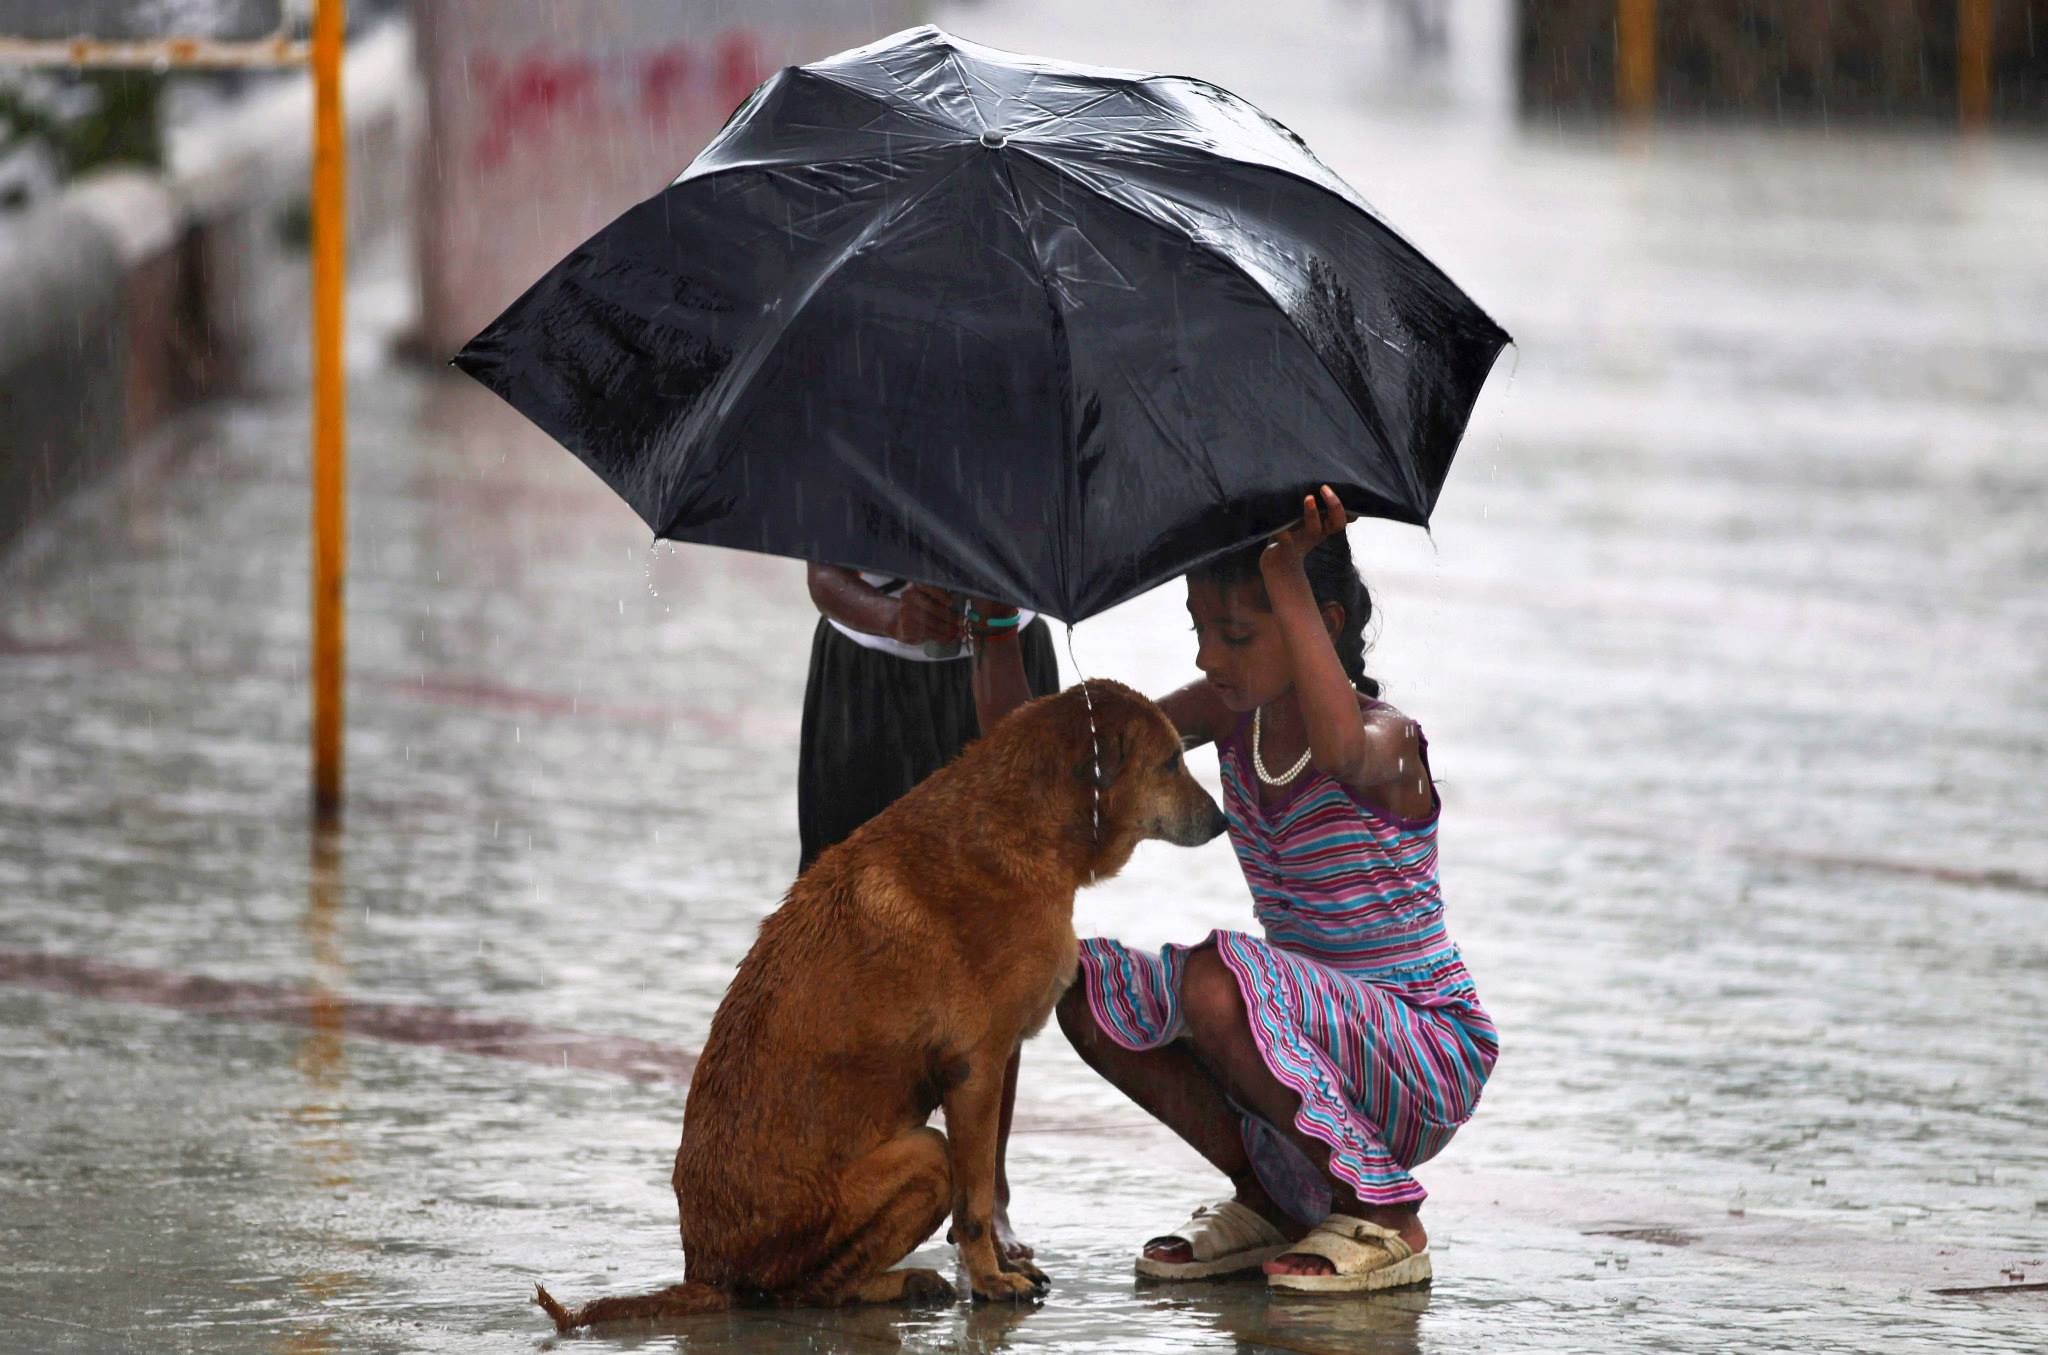 25. A girl uses her umbrella to protect a stray dog during monsoon rains in Mumbai